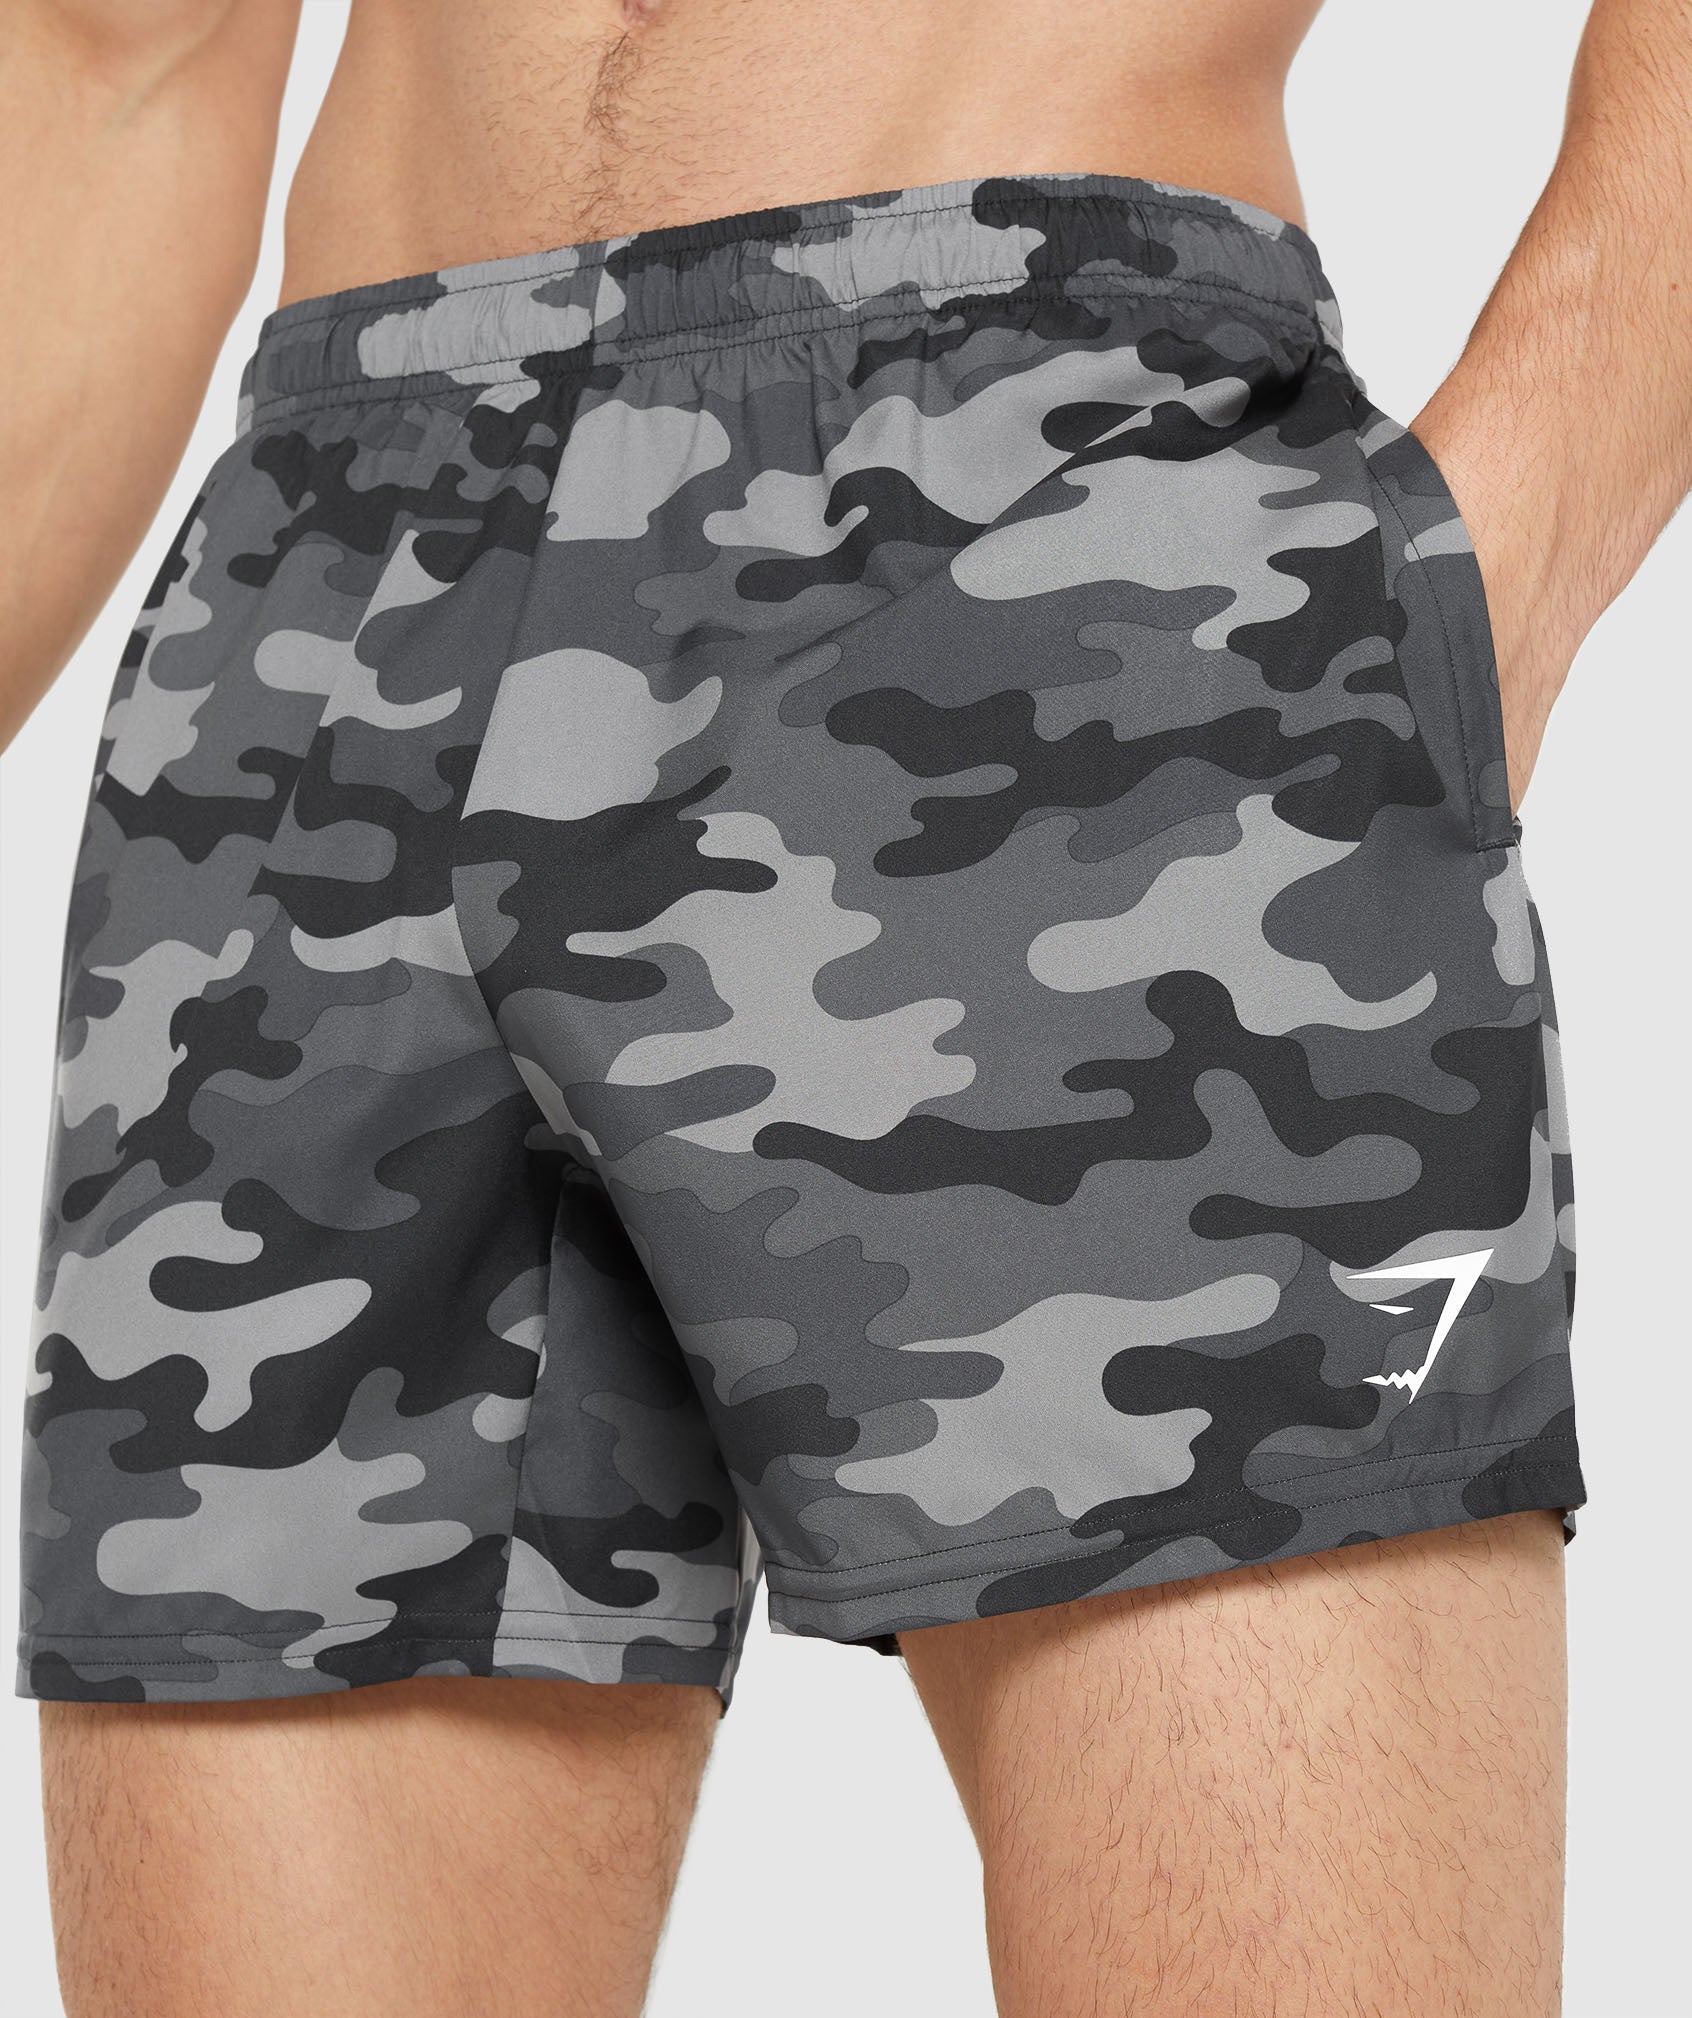 Arrival 5" Shorts in Grey Print - view 3